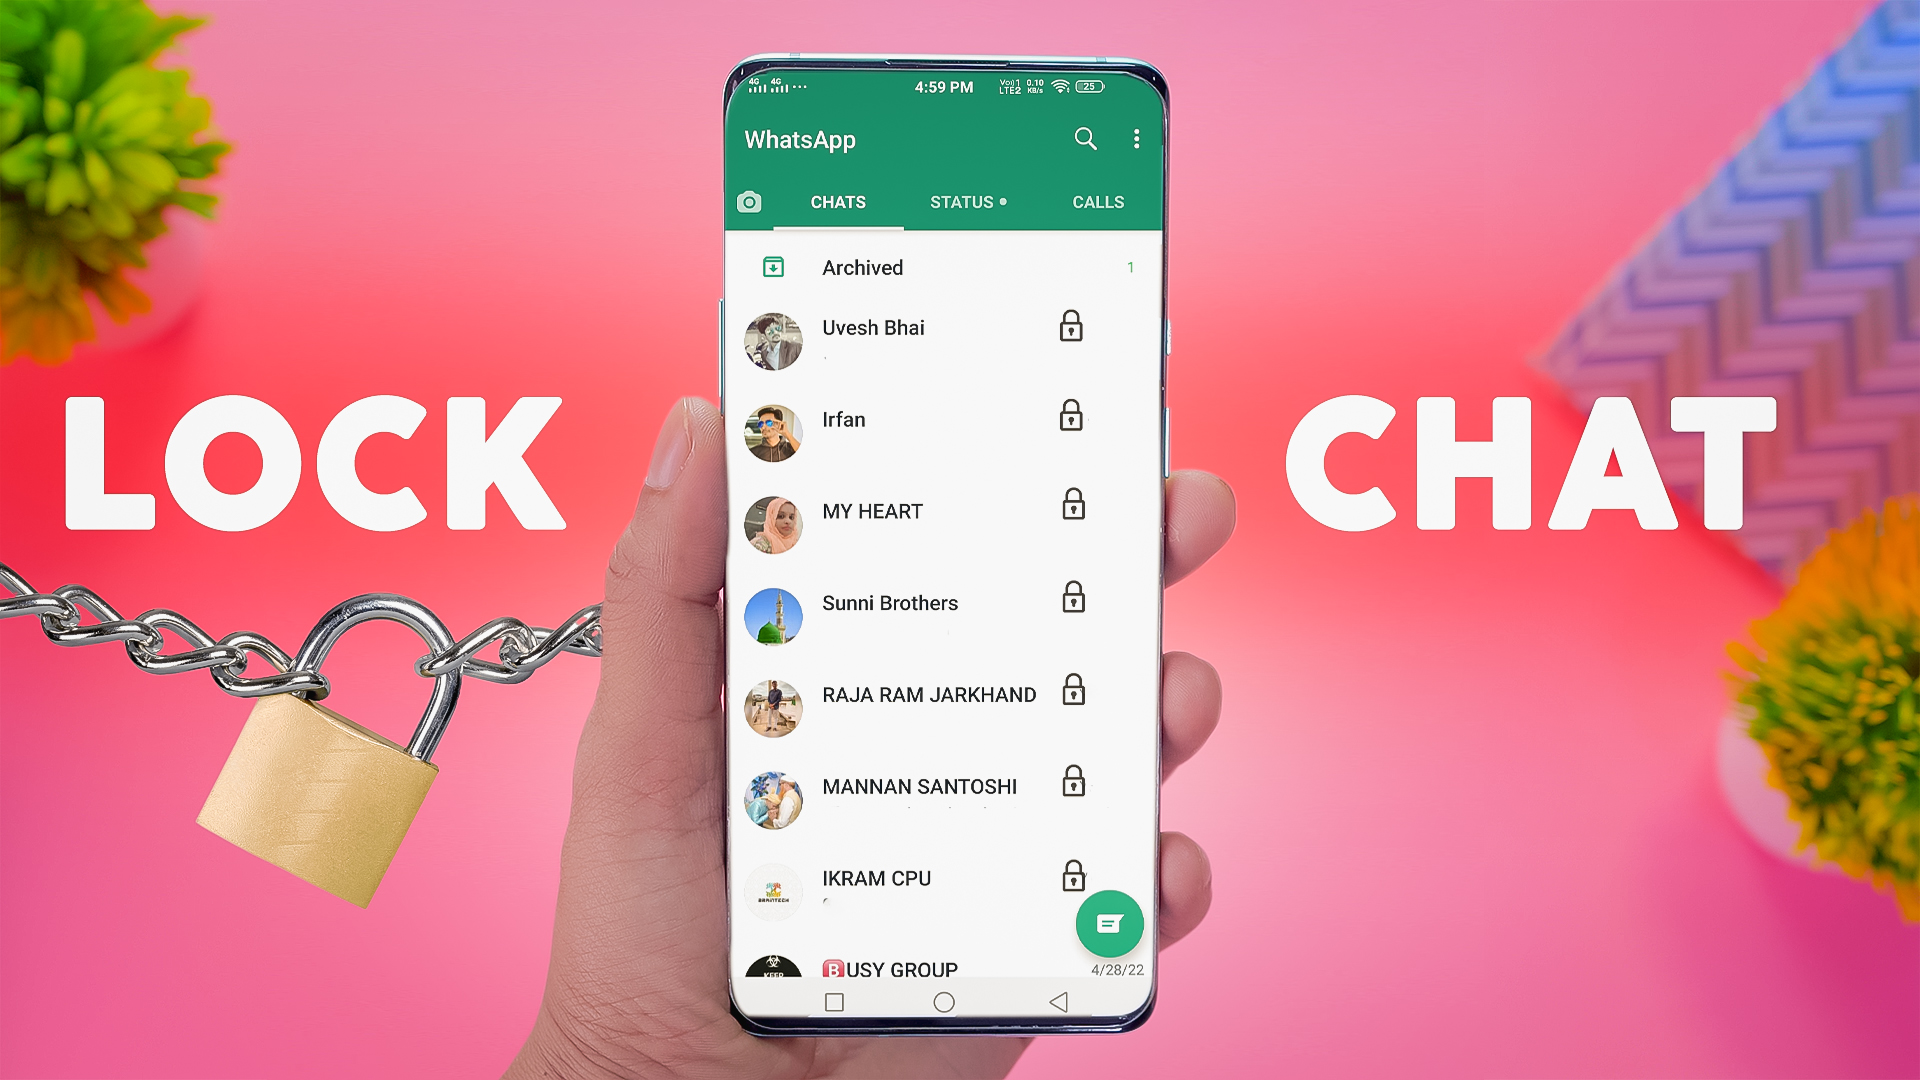 How to Lock WhatsApp Chat, Lock Your Personal Chat